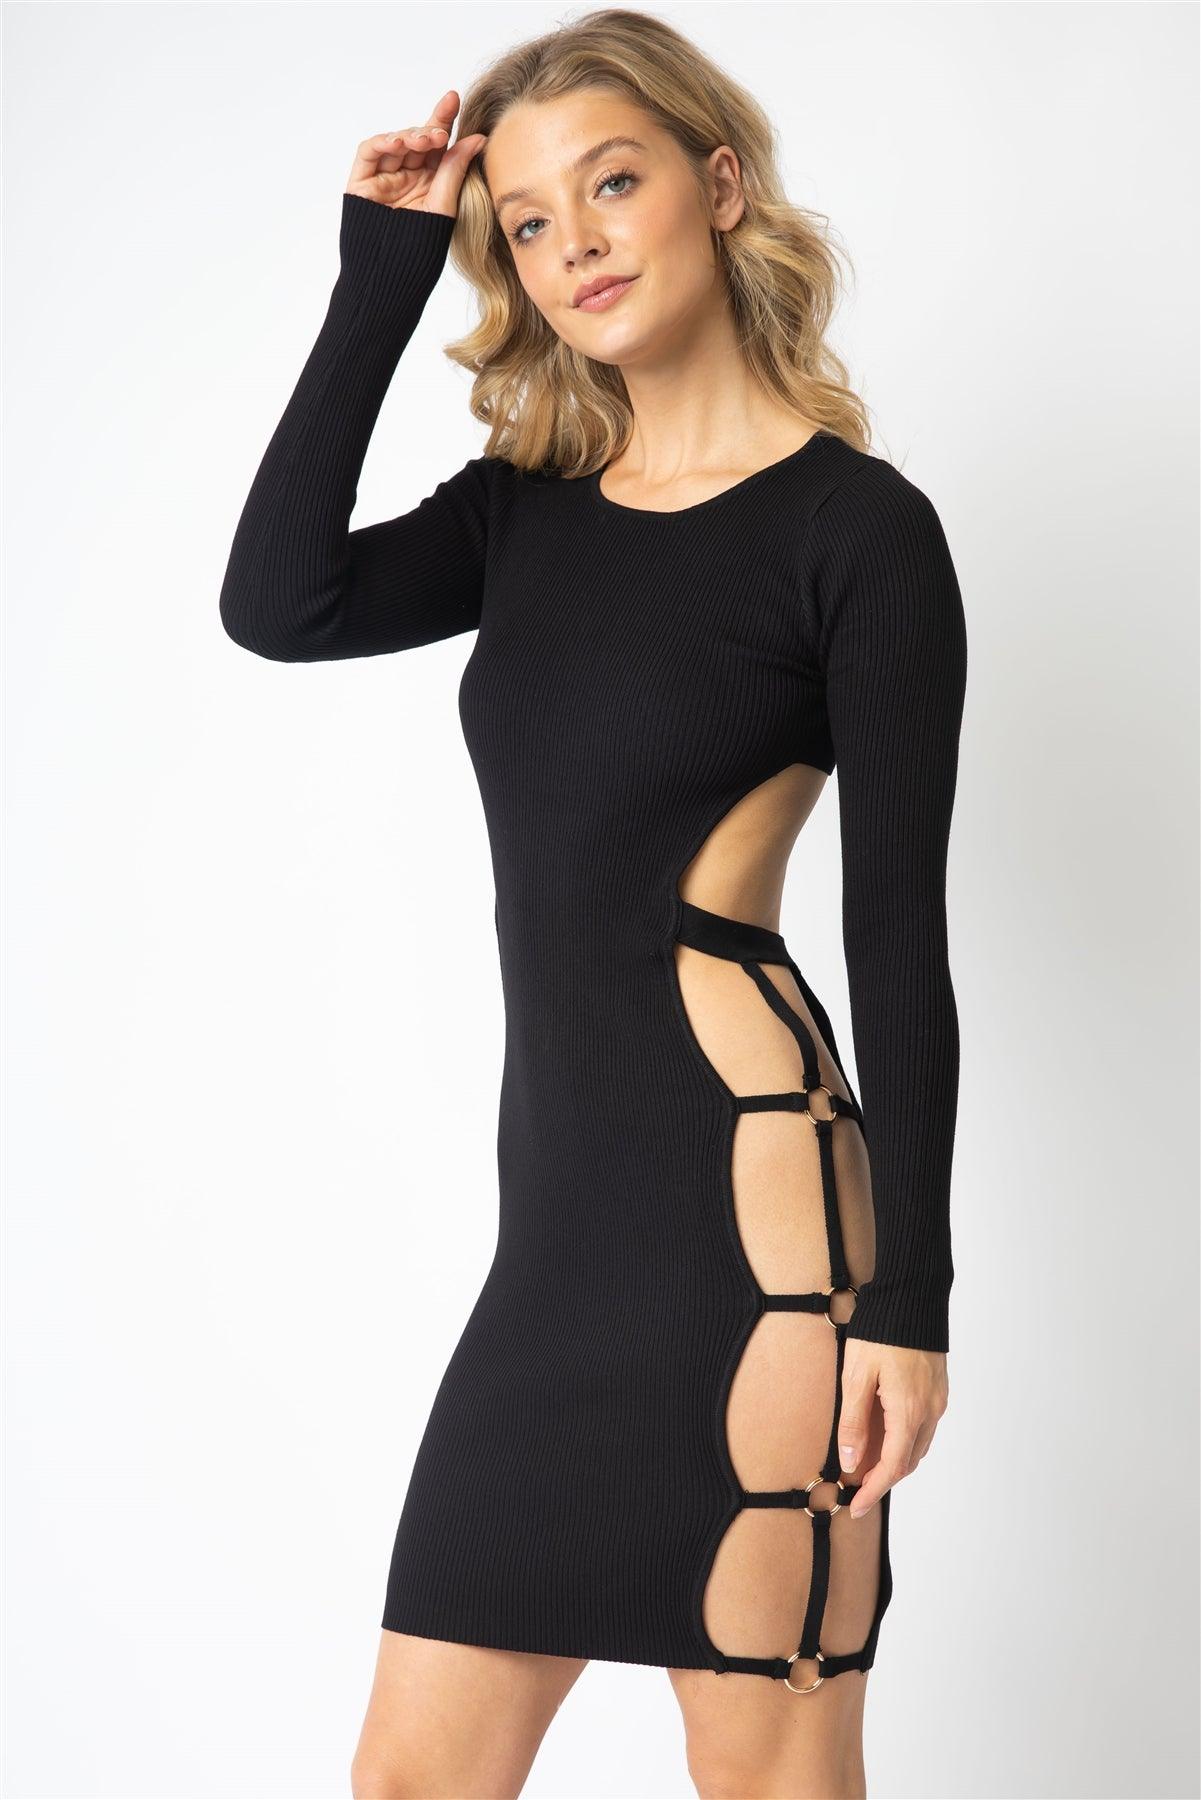 Black Knit Ribbed Side Cut-Out With Gold Tone Accent Ring Open Back Mini Dress /3-2-1